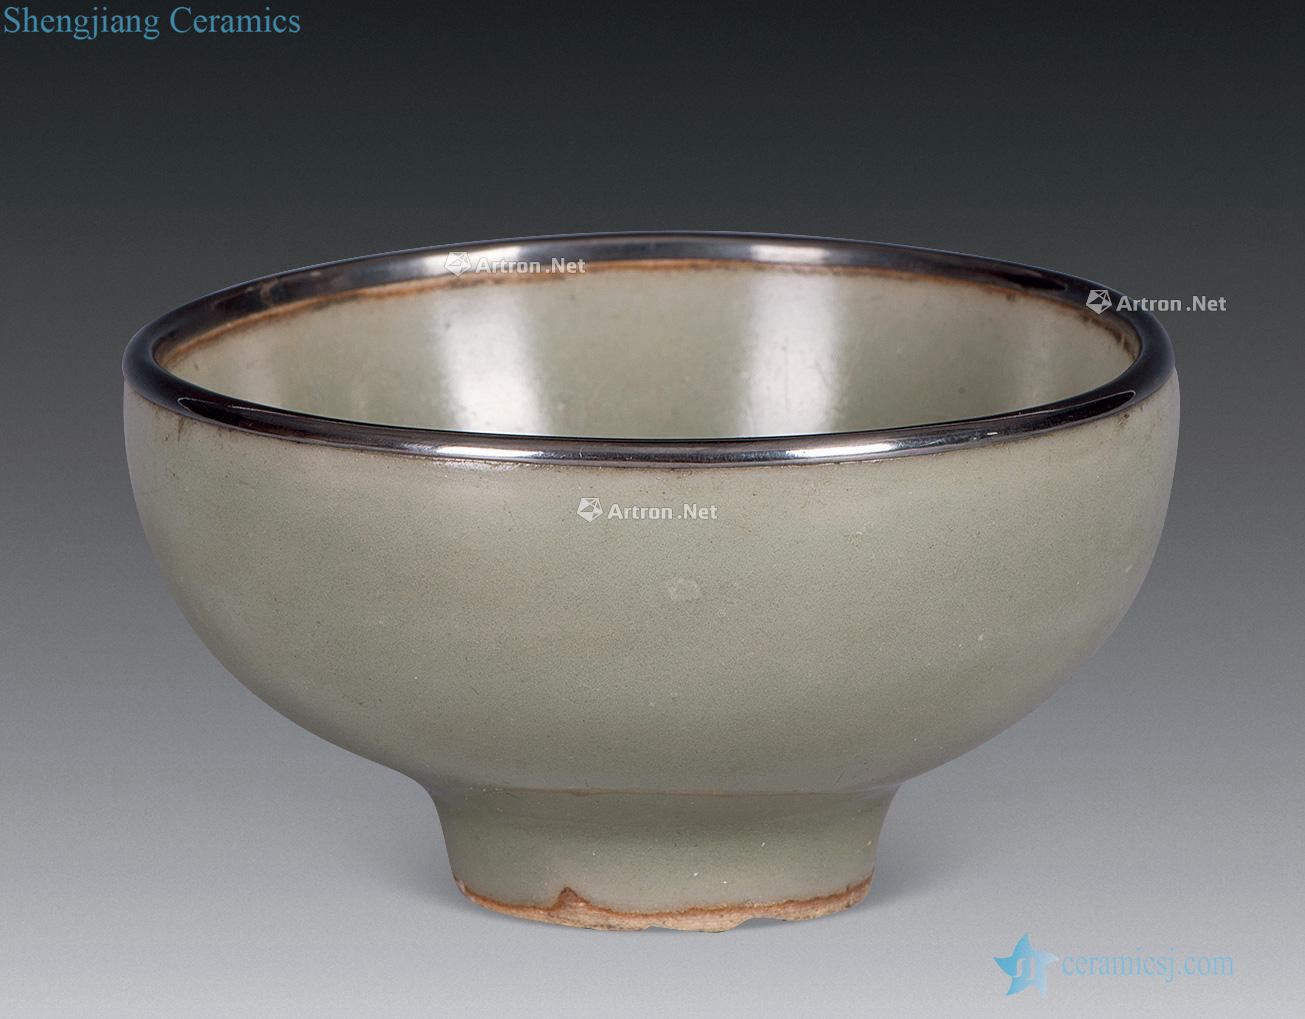 The southern song dynasty longquan cup